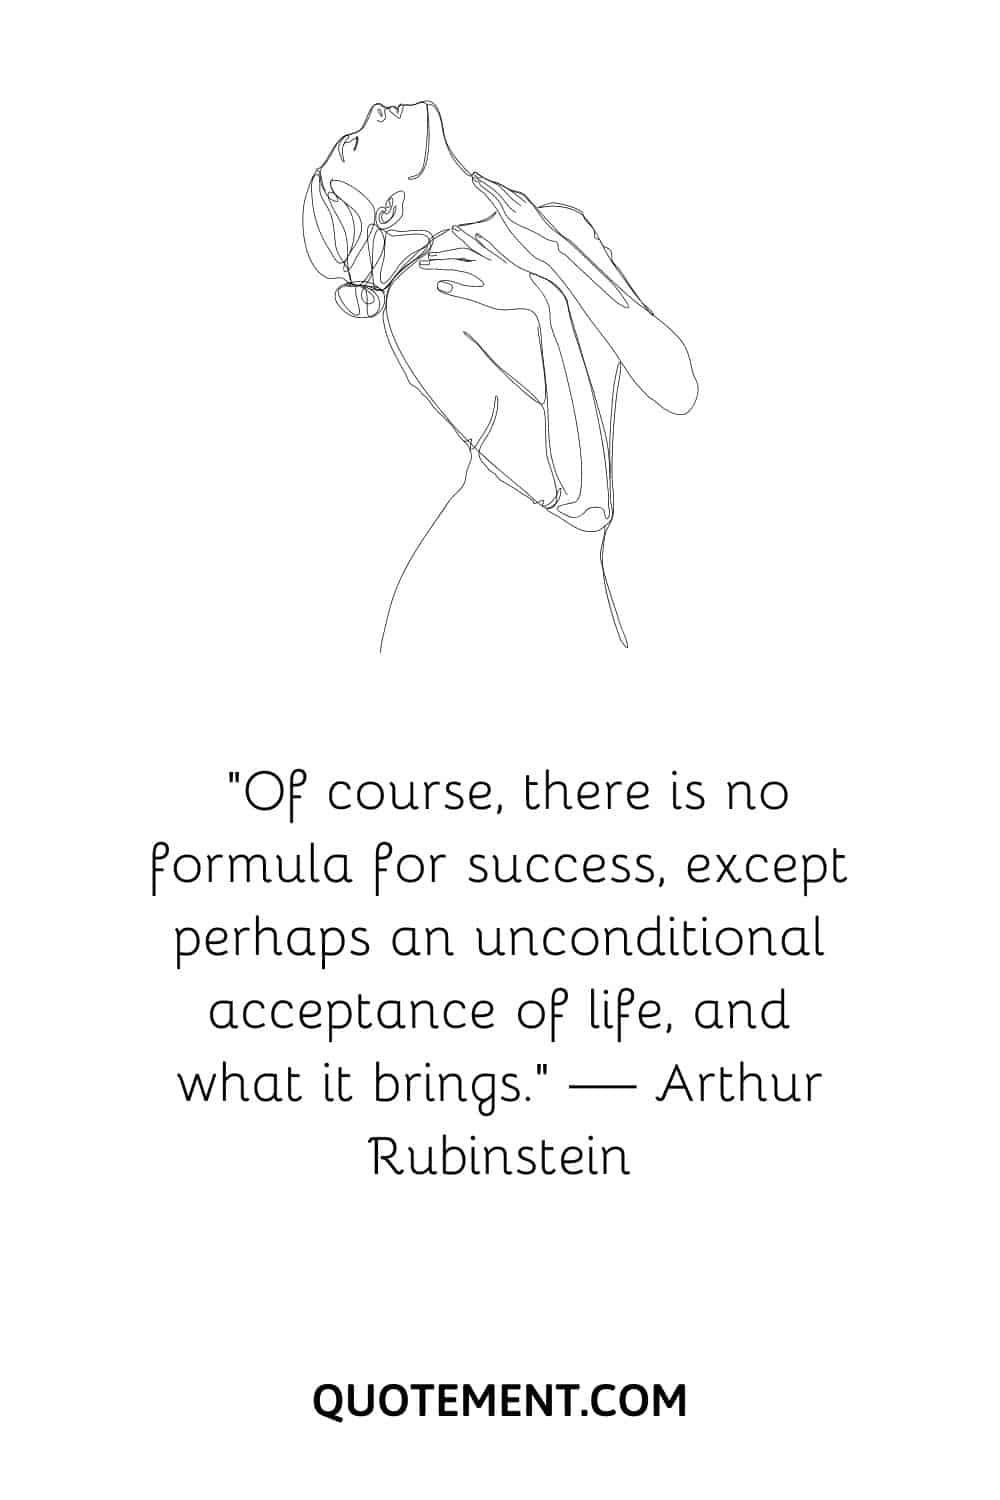 “Of course, there is no formula for success, except perhaps an unconditional acceptance of life, and what it brings.” — Arthur Rubinstein